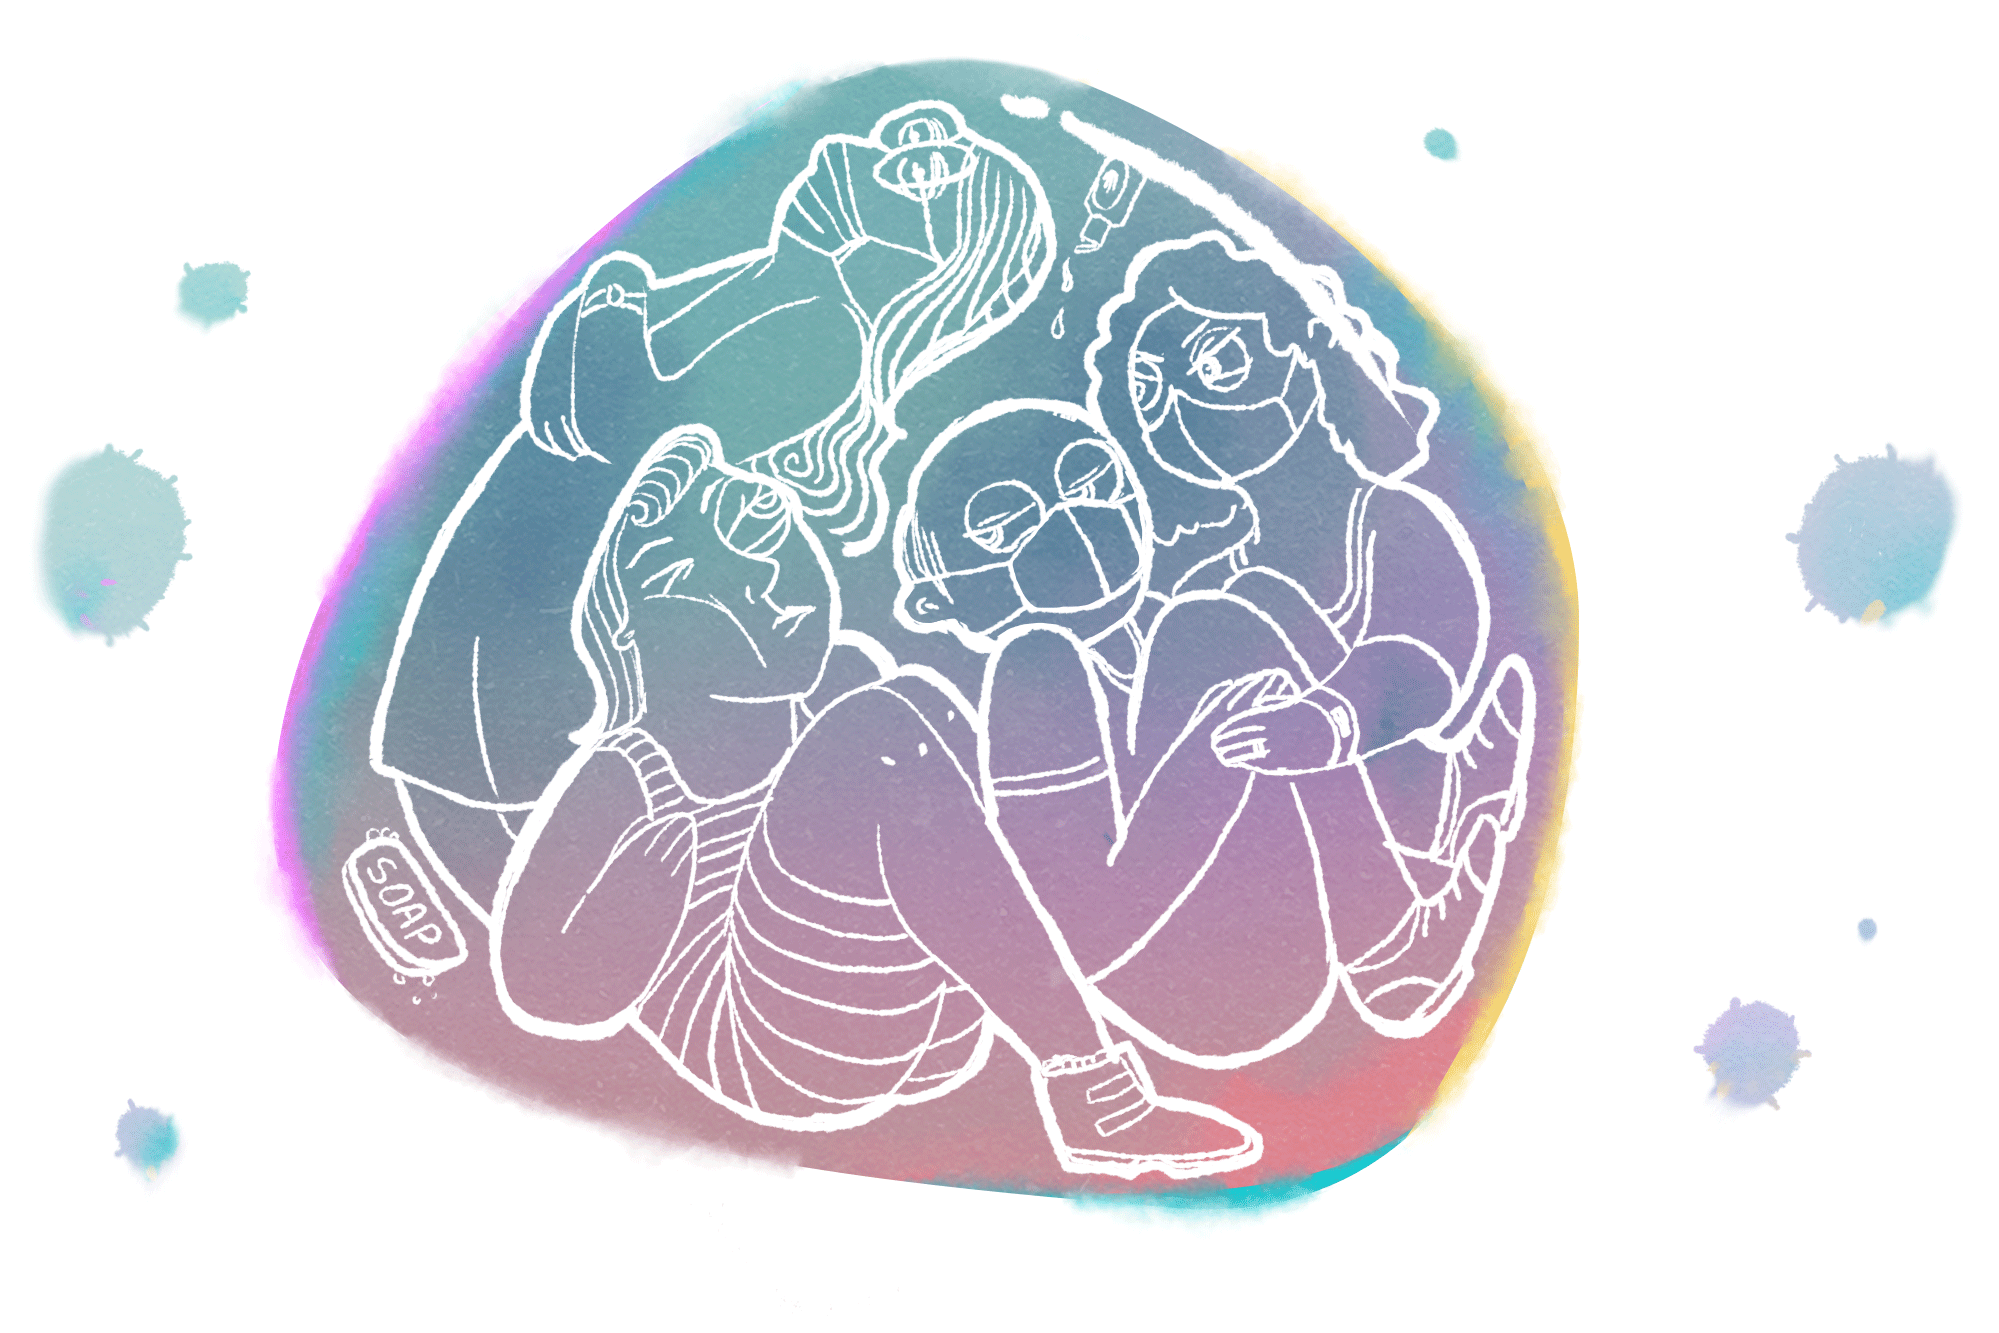 Four people illustrated crammed tightly into a bubble